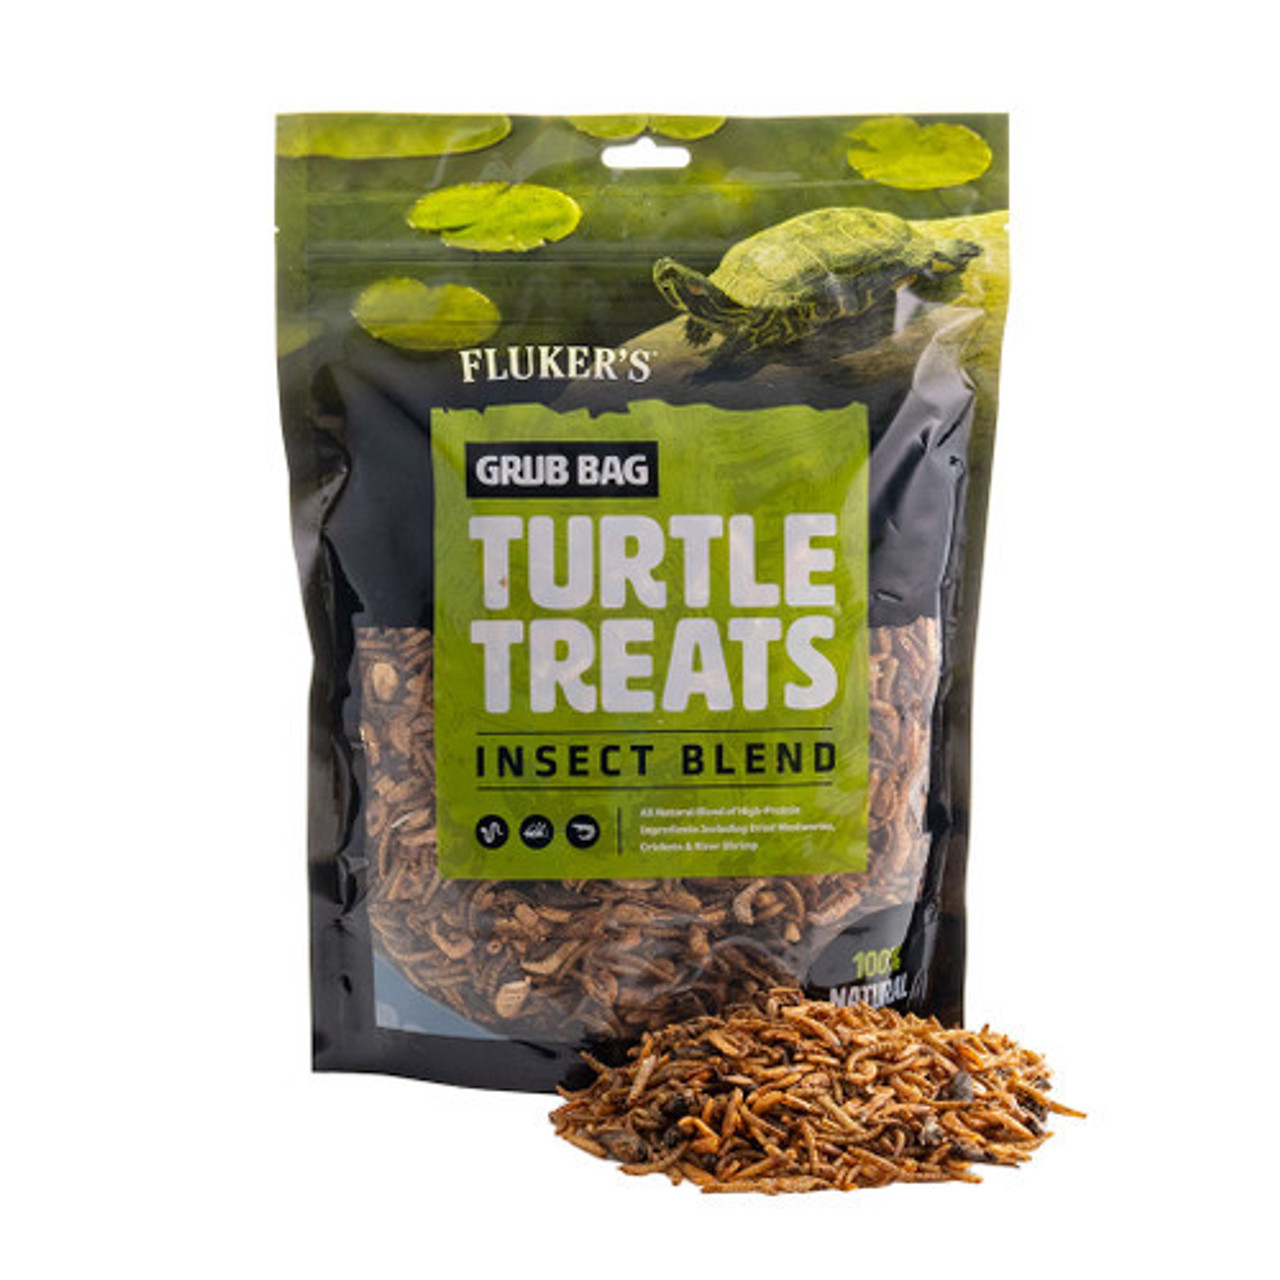 Grub Bag Turtle treats 12oz bag of Insect Blend with a detail photo of contents.